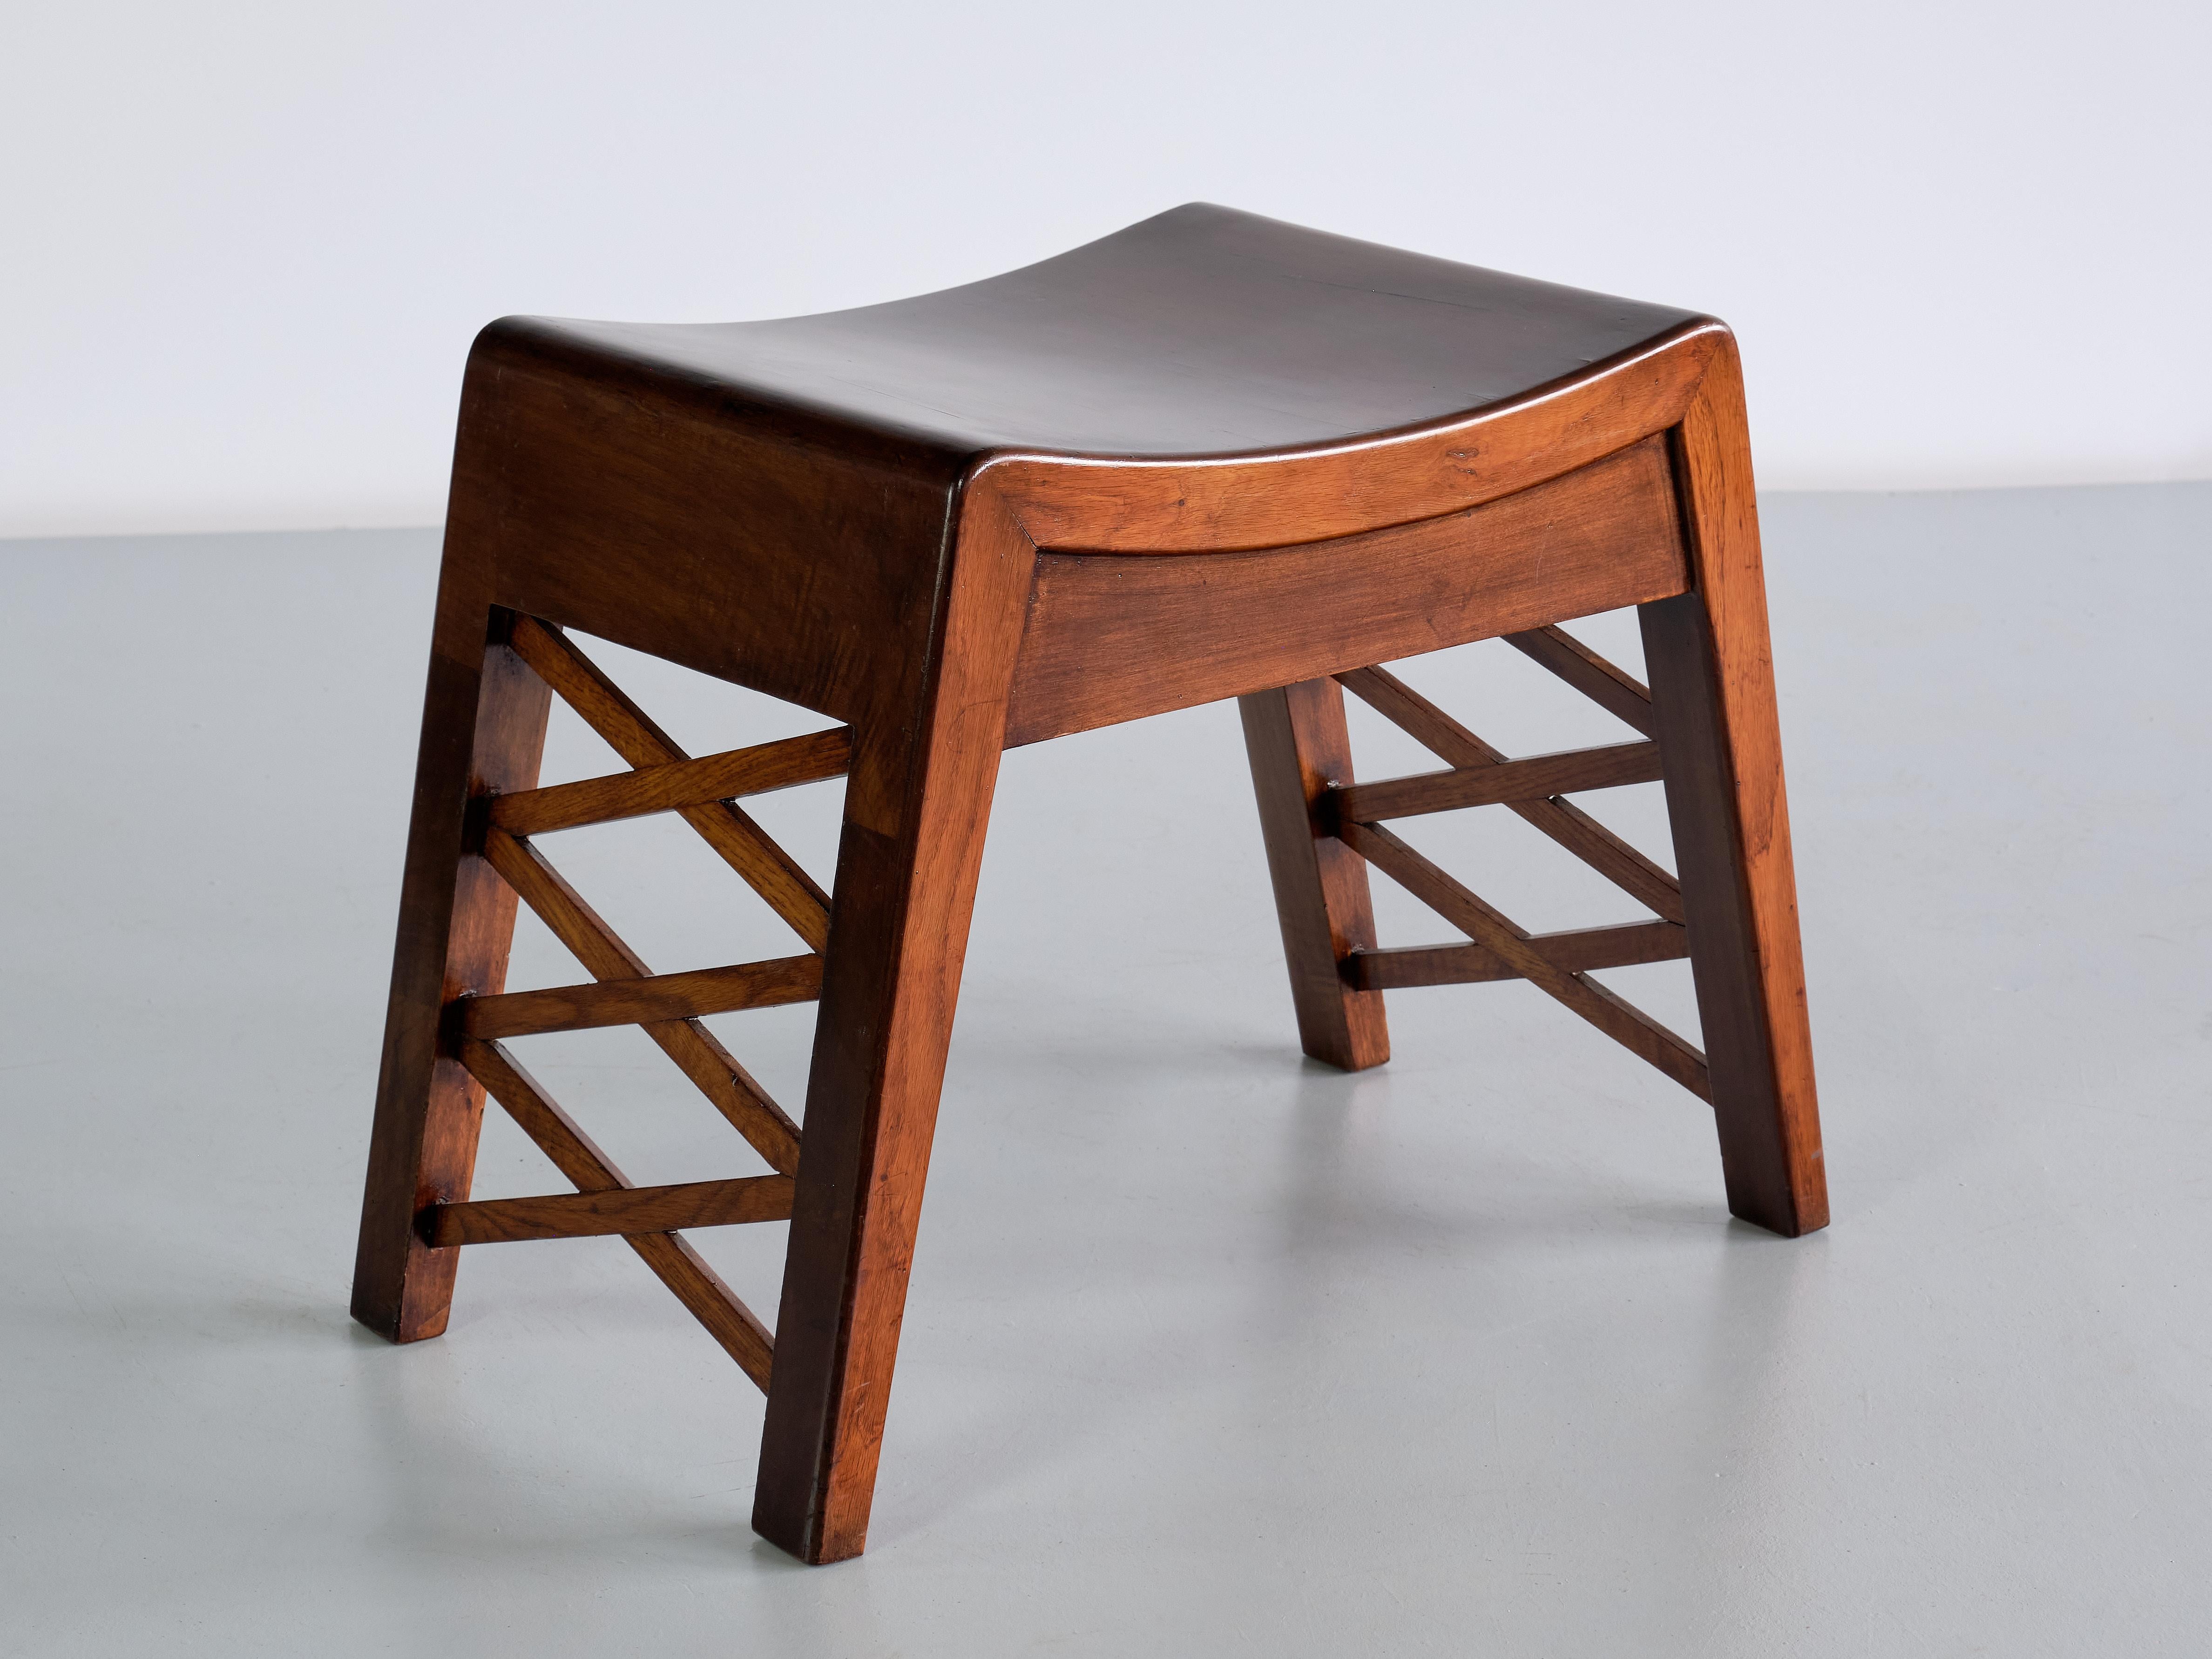 Piero Portaluppi Attributed Pair of Stools in Chestnut Wood, Italy, Late 1930s For Sale 4